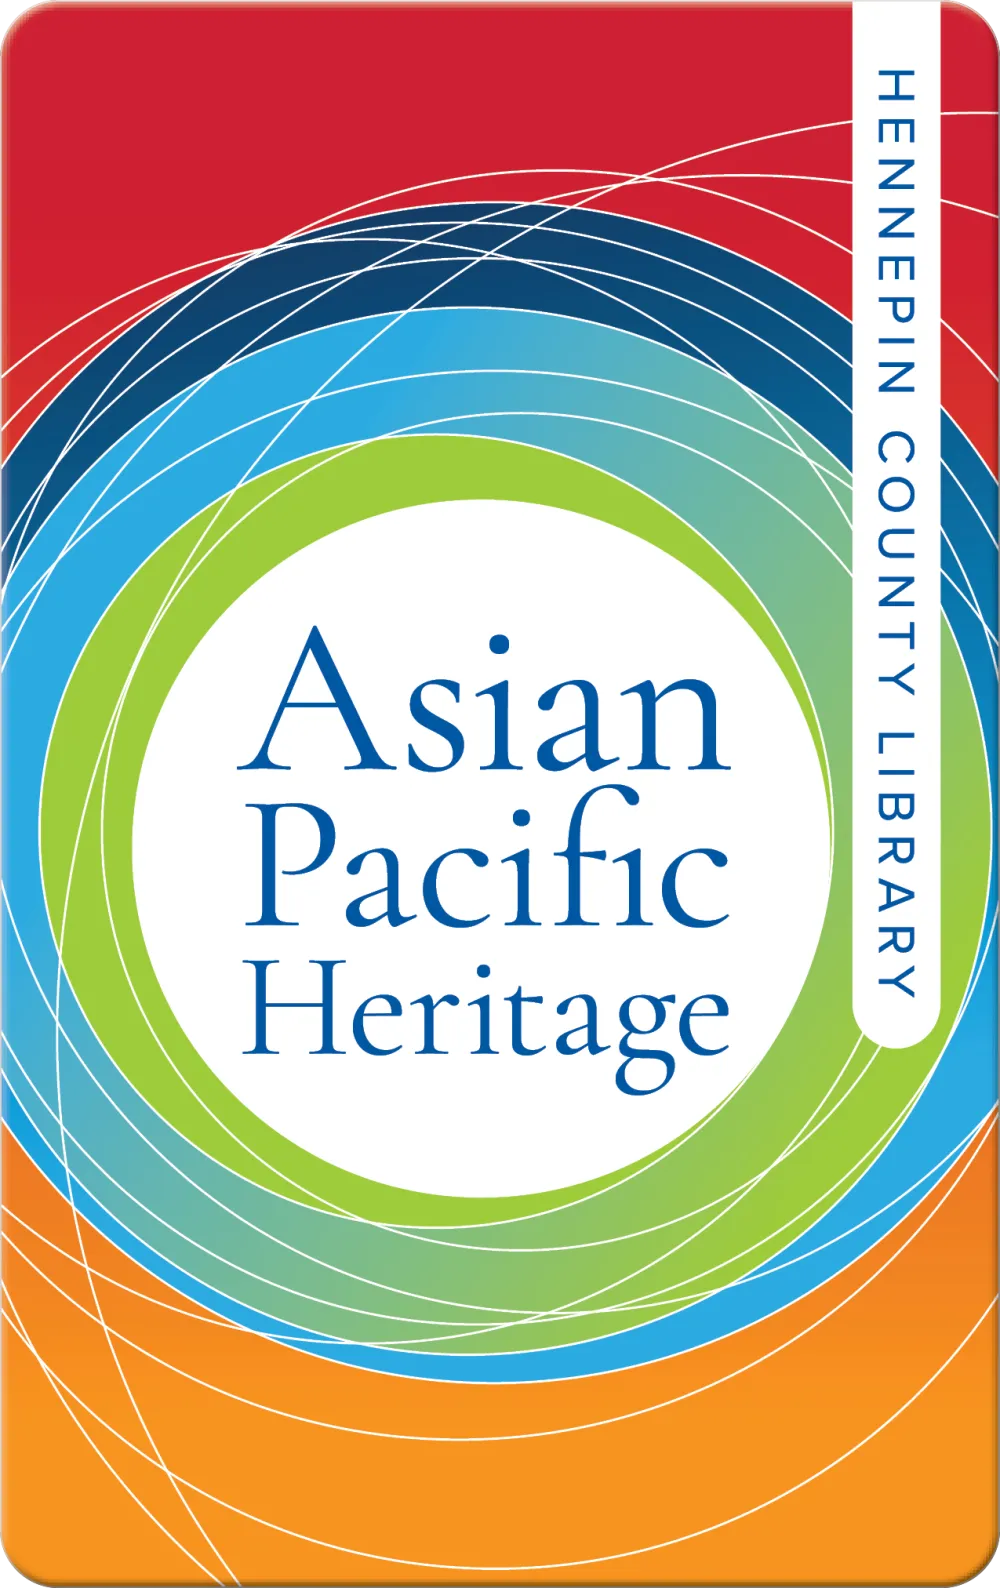 Asian Pacific Heritage library card design